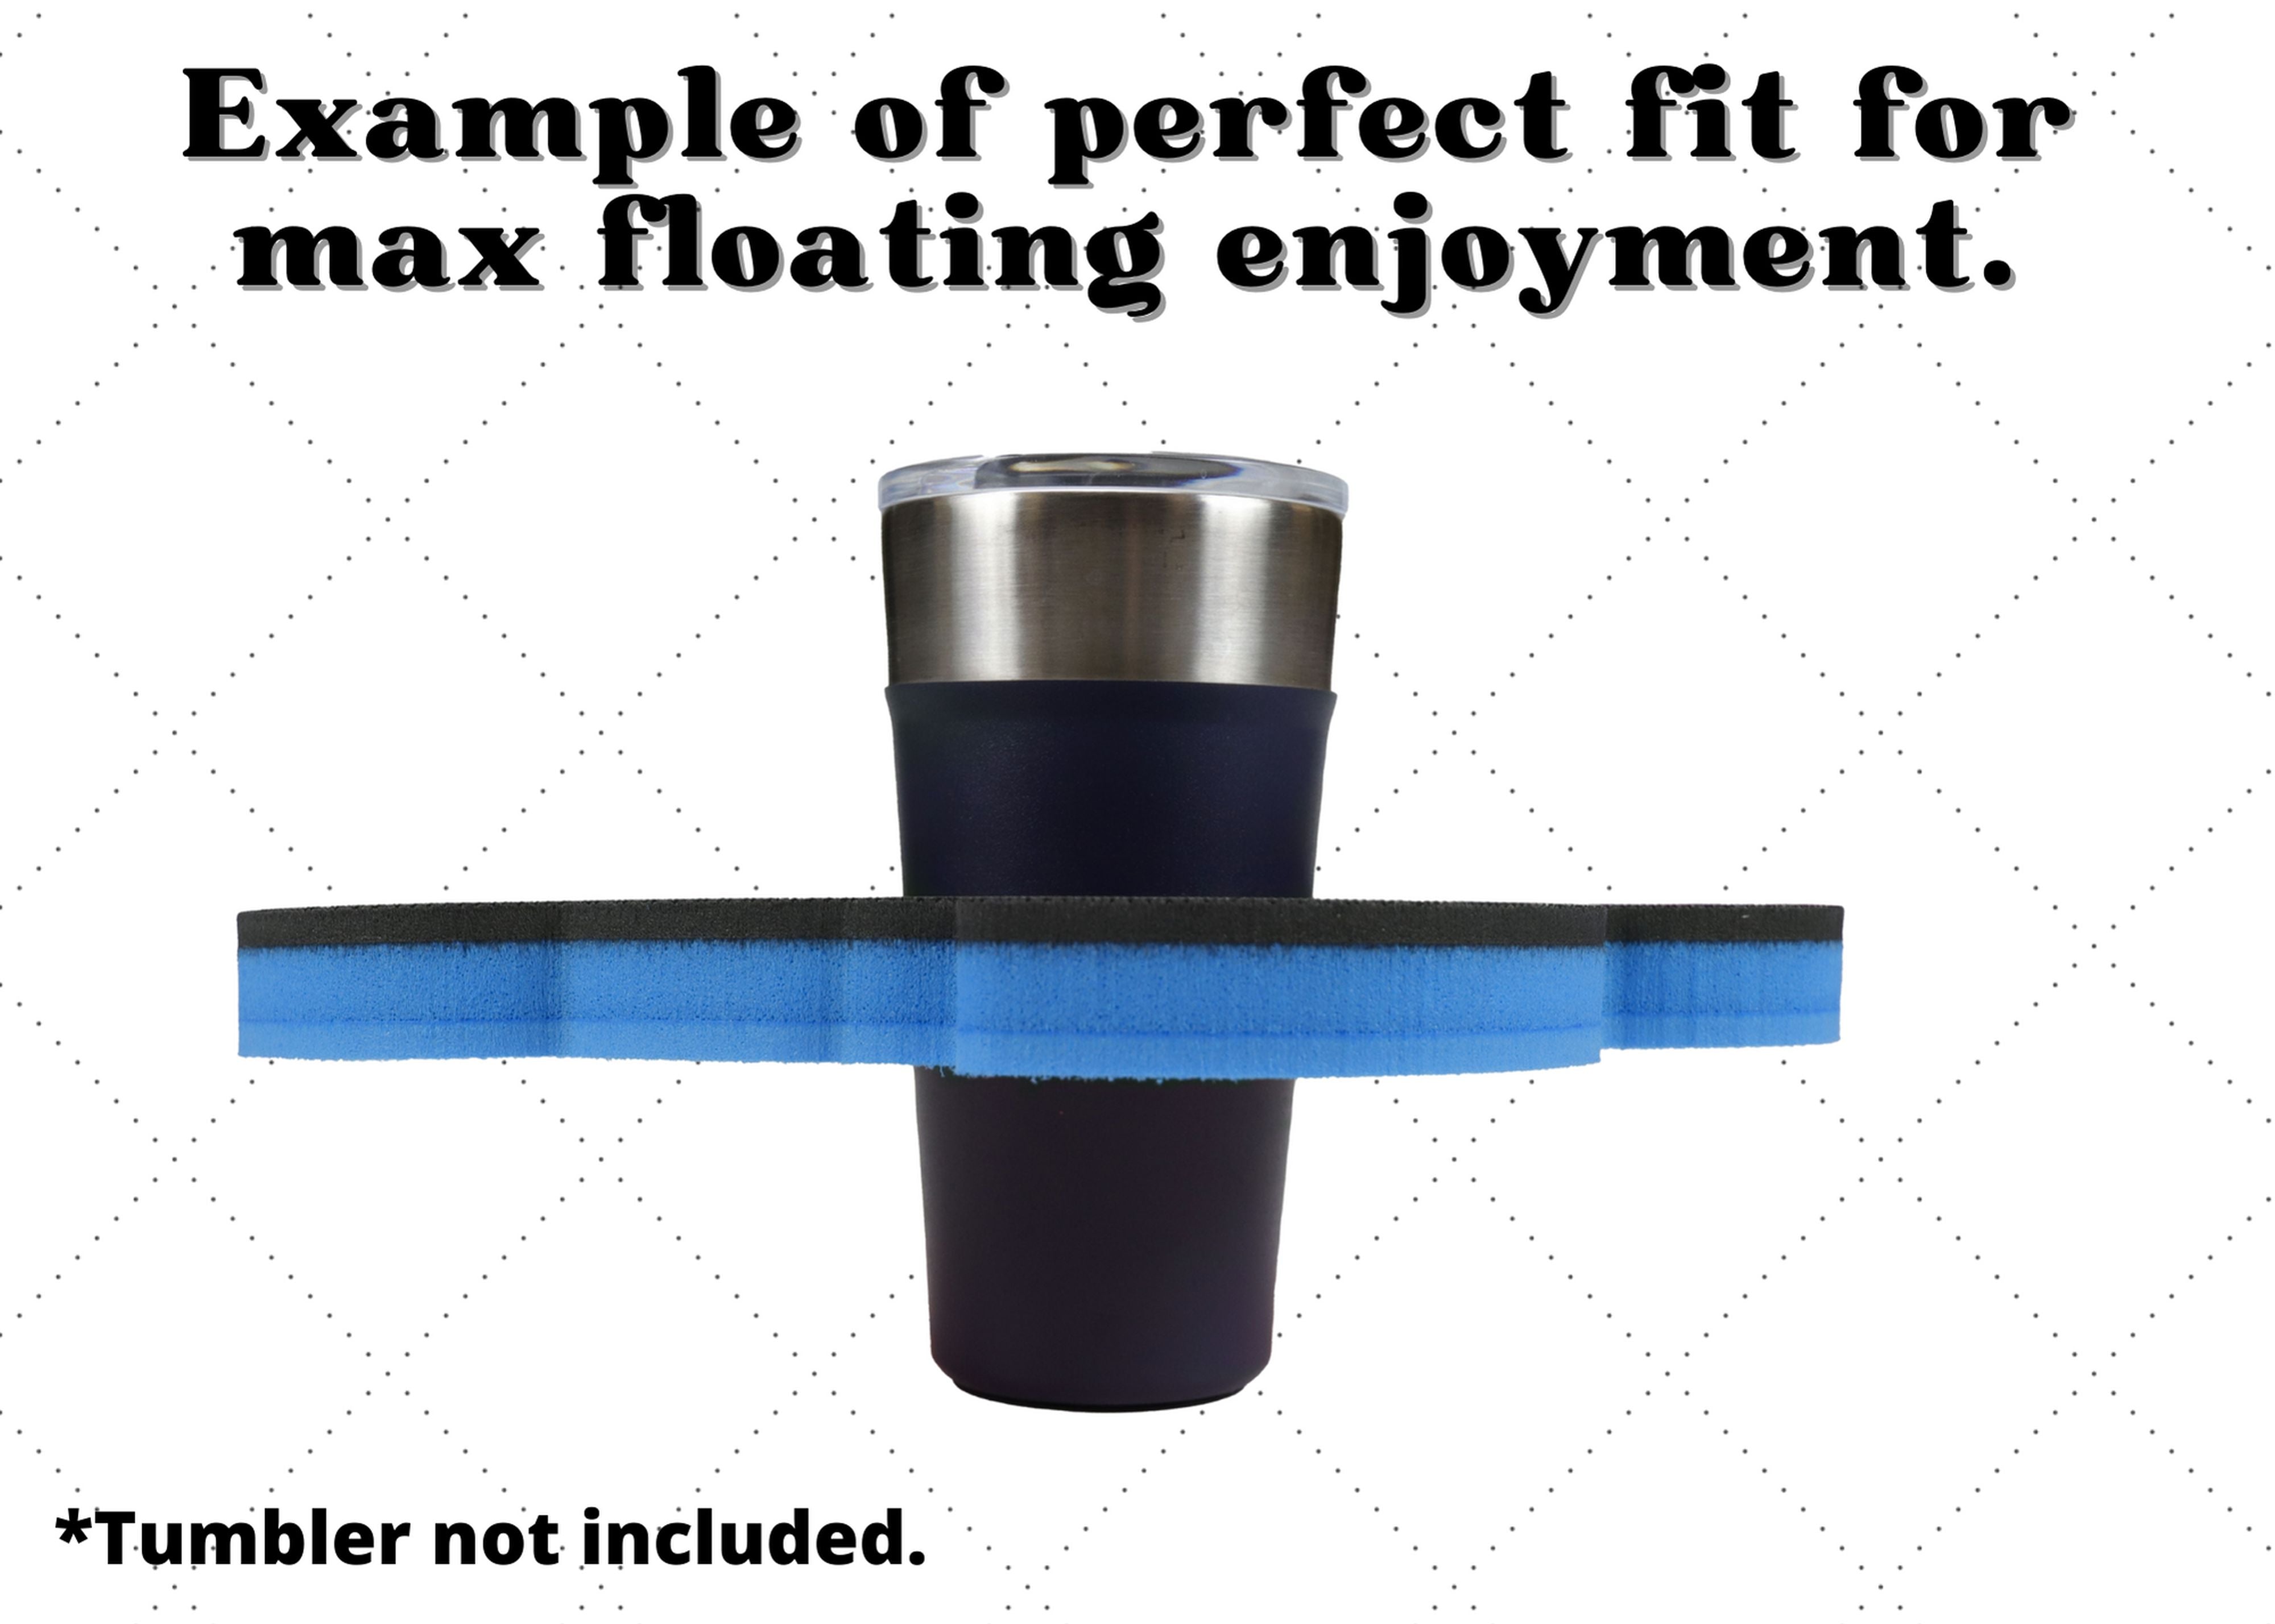 Universal Sea Turtle Tumbler Holder Floating Drink Pool Durable 11.71 In fit 16 to 30 Oz Compatible with YETI Ozark Trail RTIC One Size Fits All